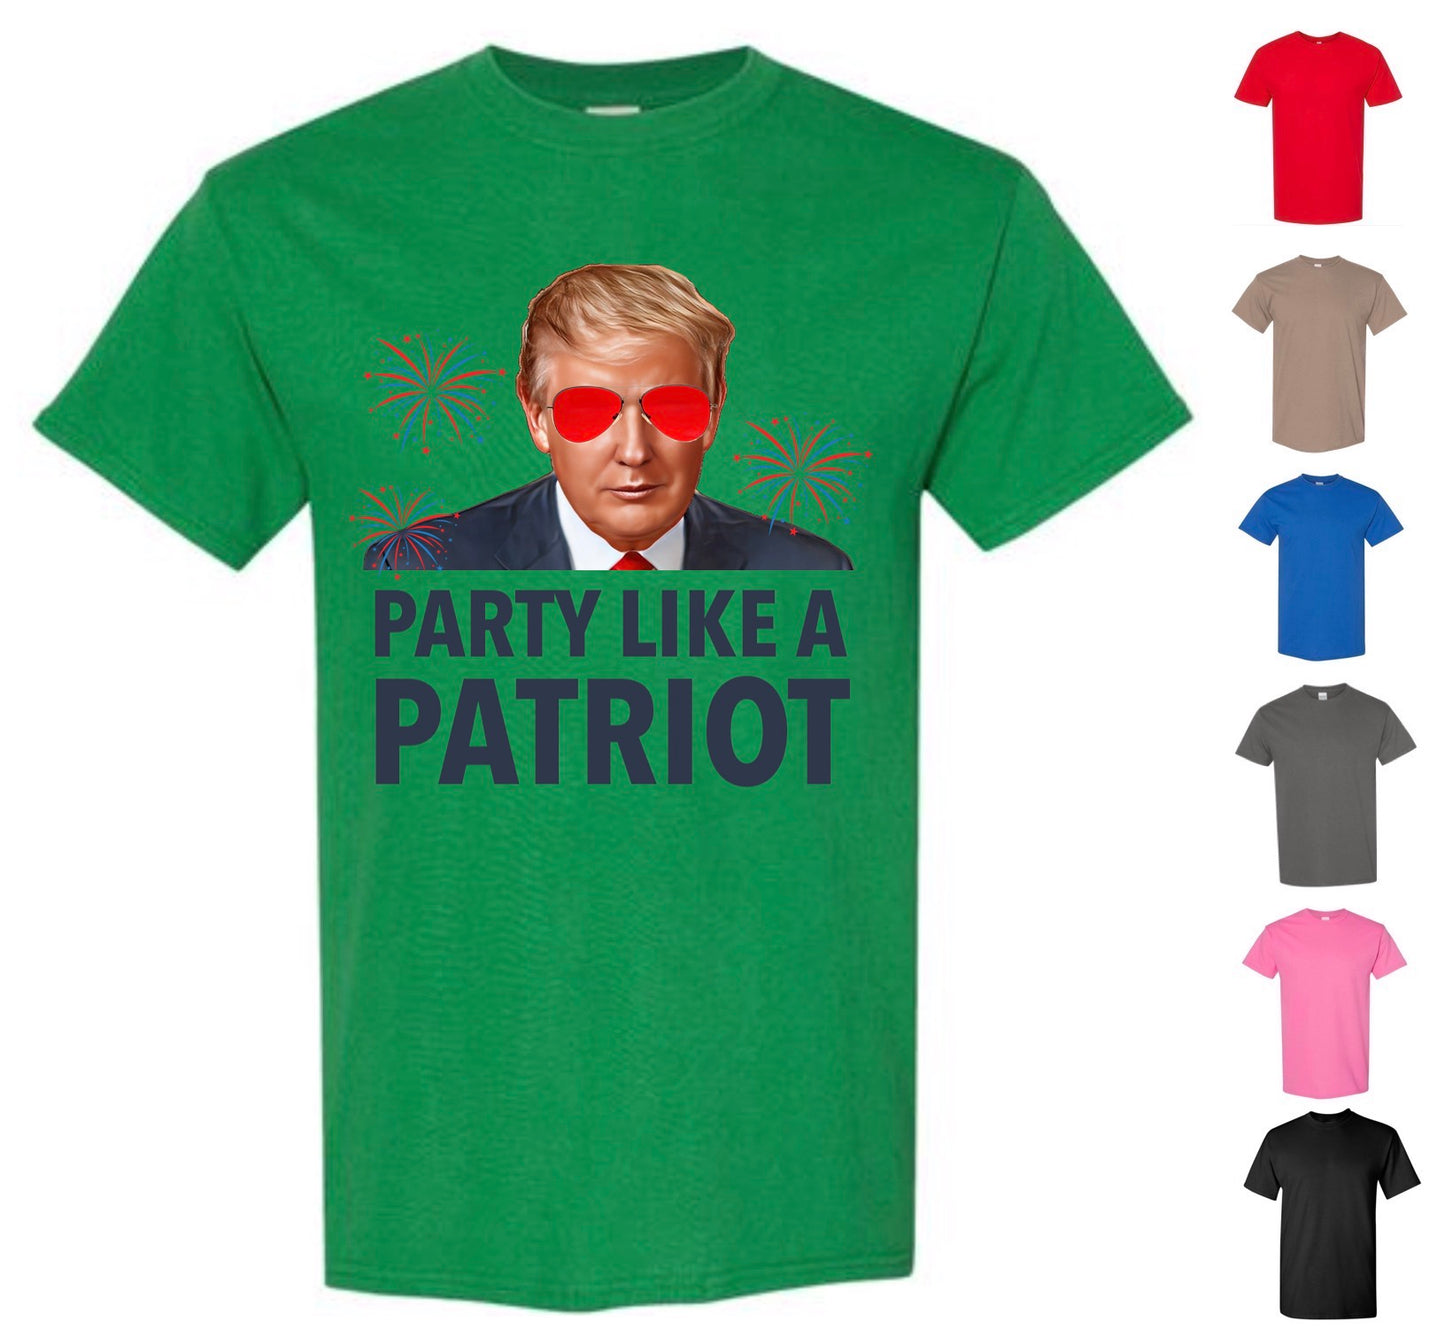 Party Like A Patriot Trump T-Shirt, 4th of July (Free Shipping)